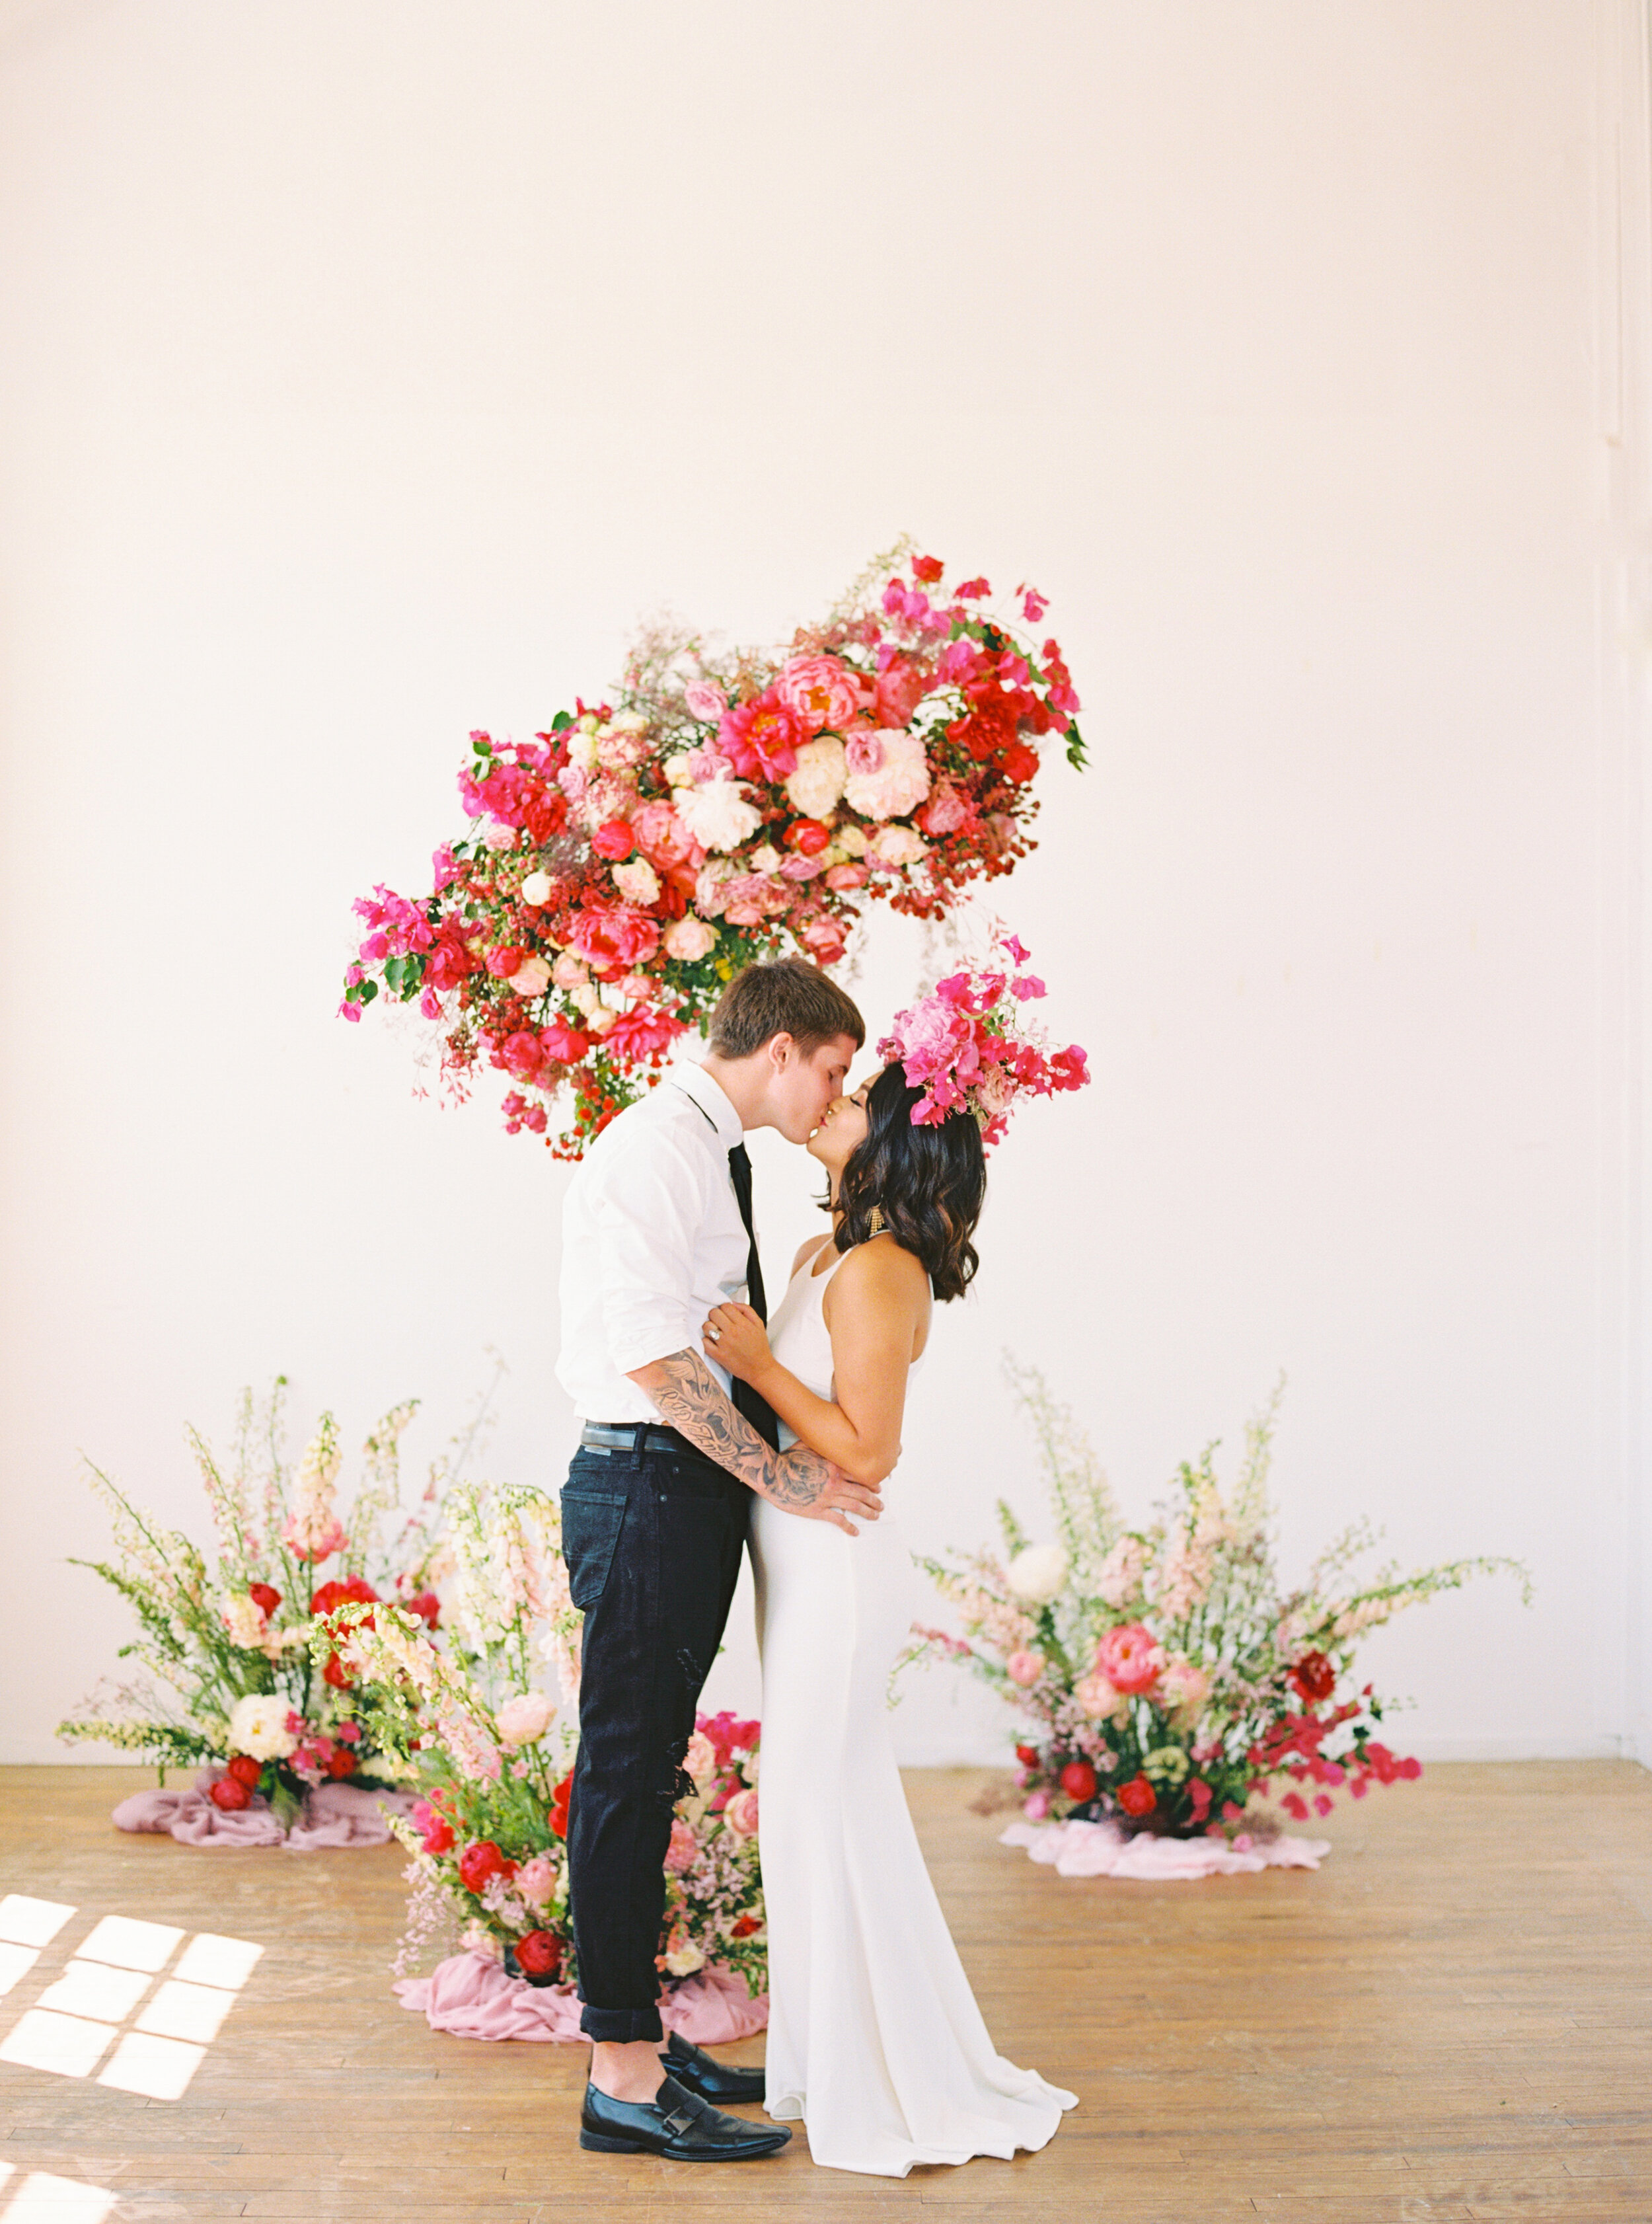 A Romantic Wedding Elopement Filled with Colorful Fuchsia - Sarahi Hadden Submission-58.jpg